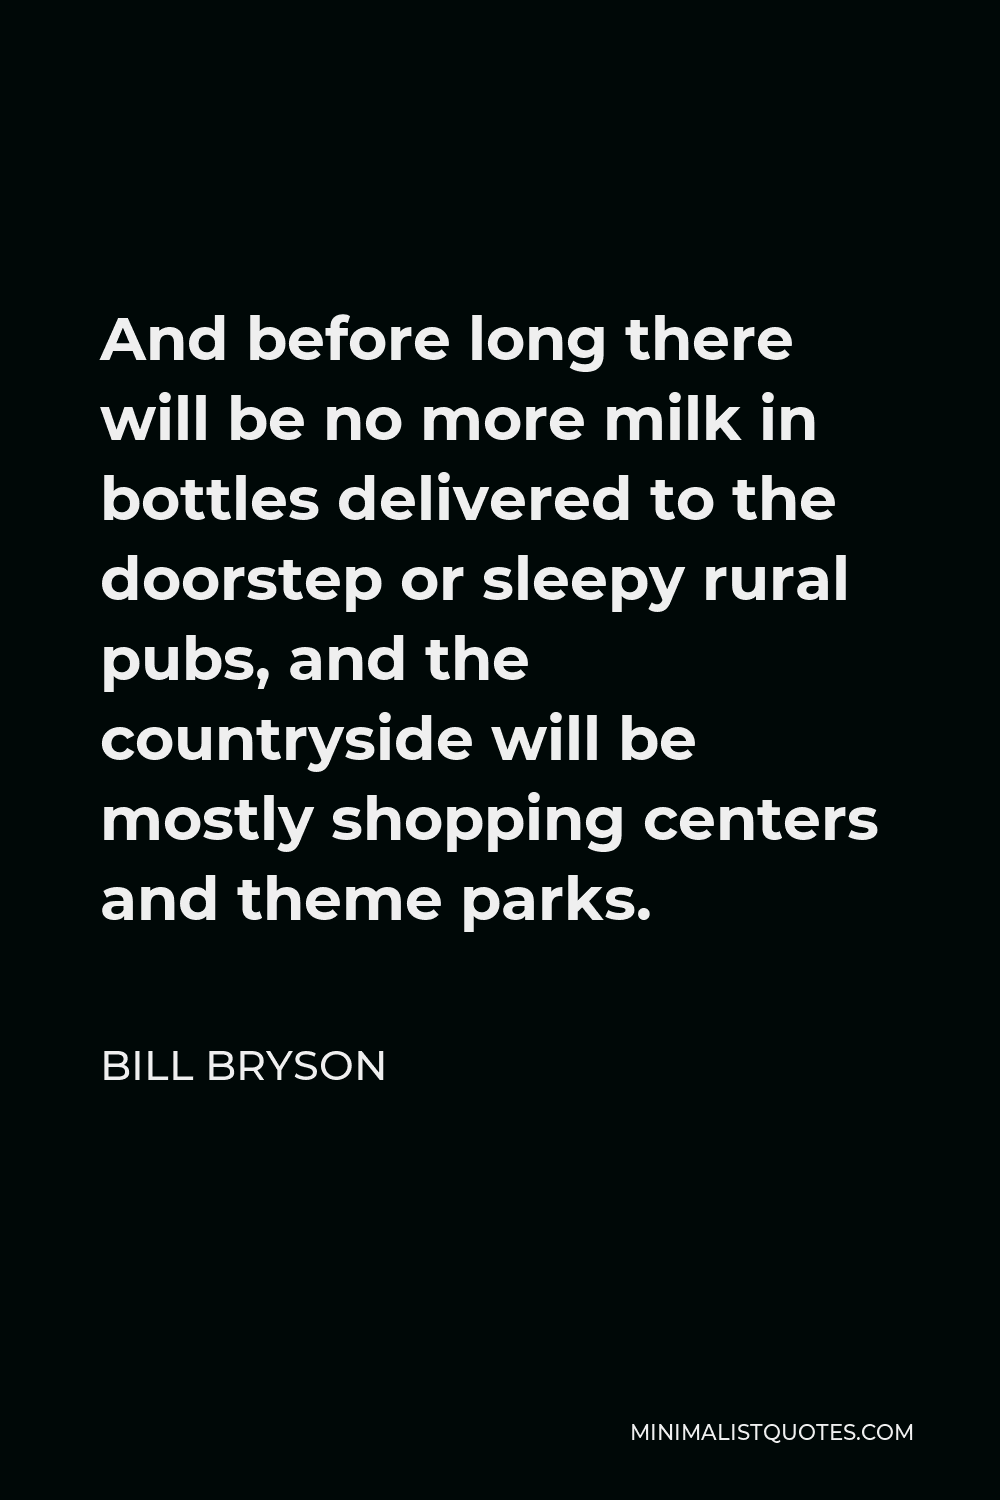 Bill Bryson Quote - And before long there will be no more milk in bottles delivered to the doorstep or sleepy rural pubs, and the countryside will be mostly shopping centers and theme parks.